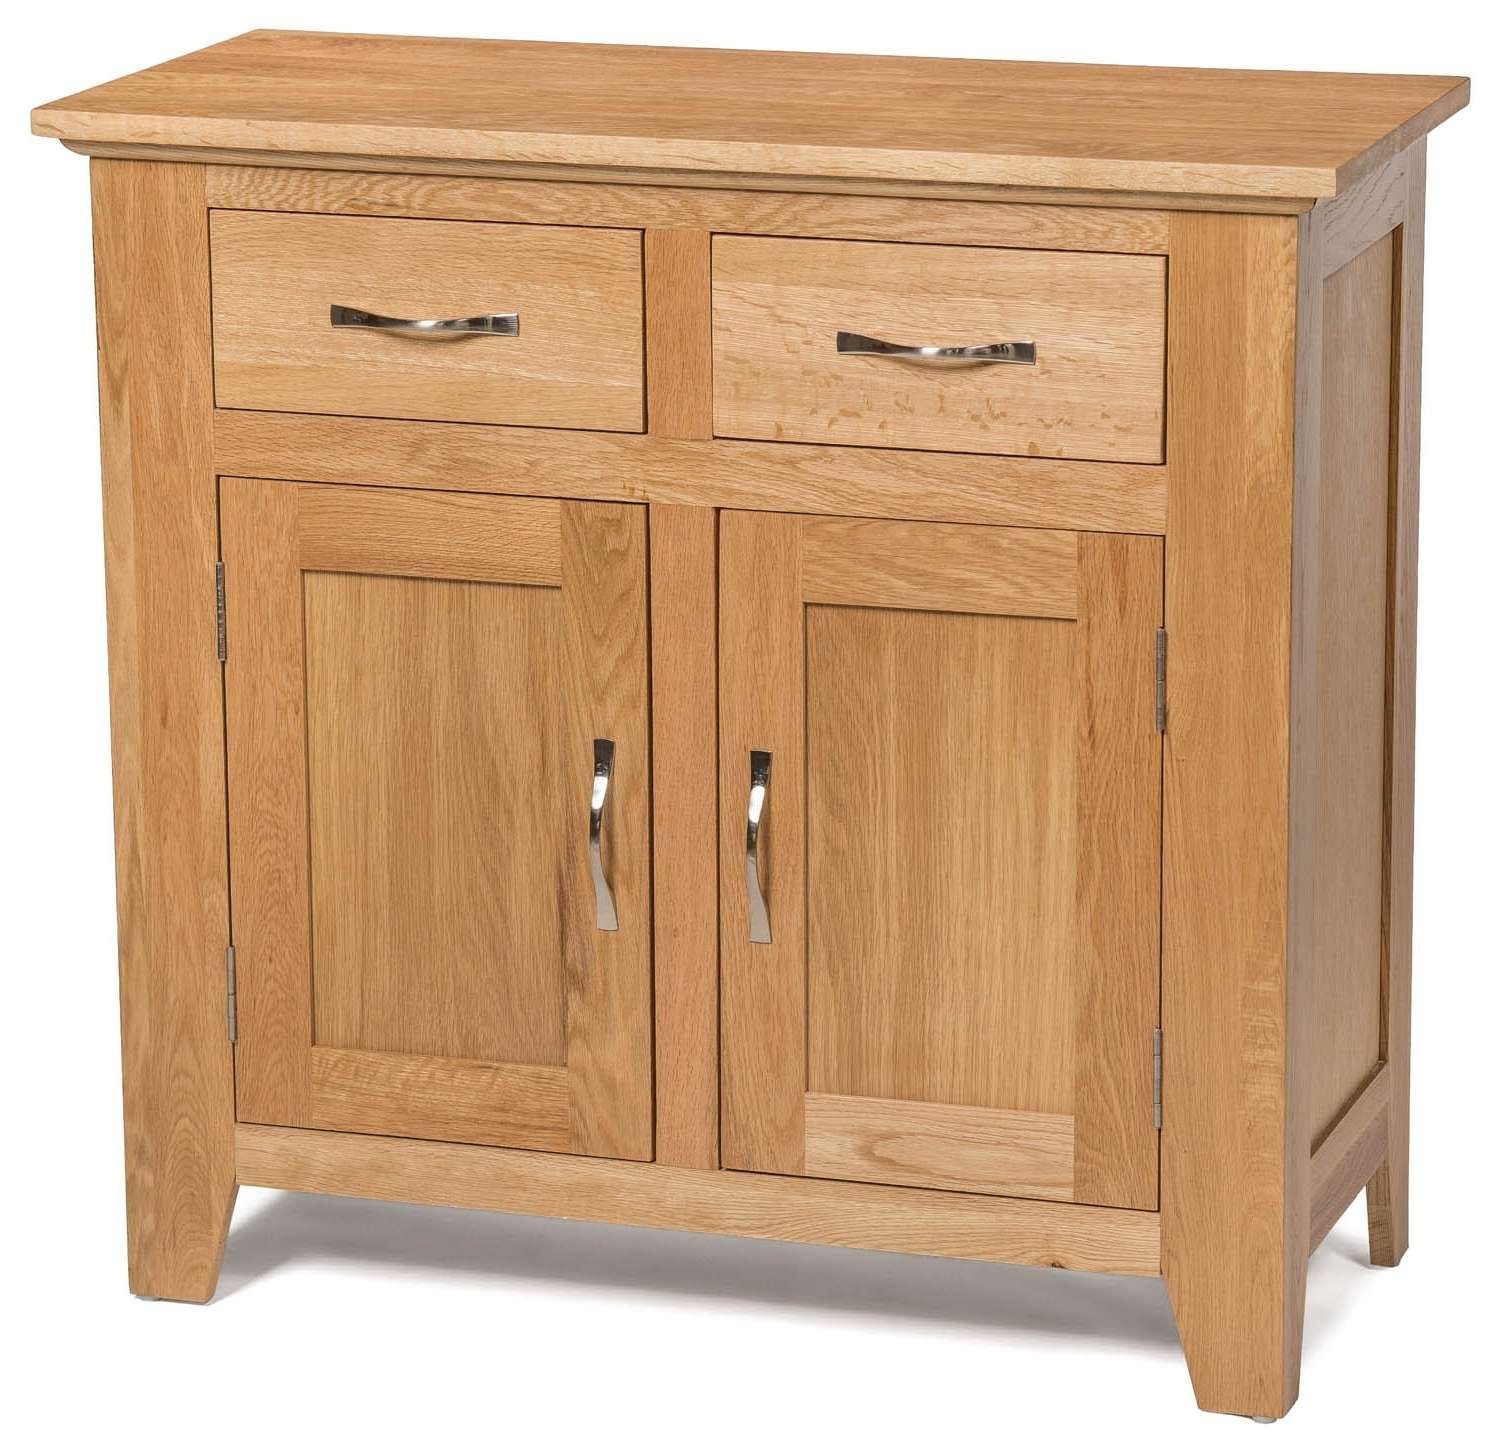 Camberley Oak Small 2 Door 2 Drawer Sideboard – Sideboards & Tops Within Small Sideboards (View 15 of 20)